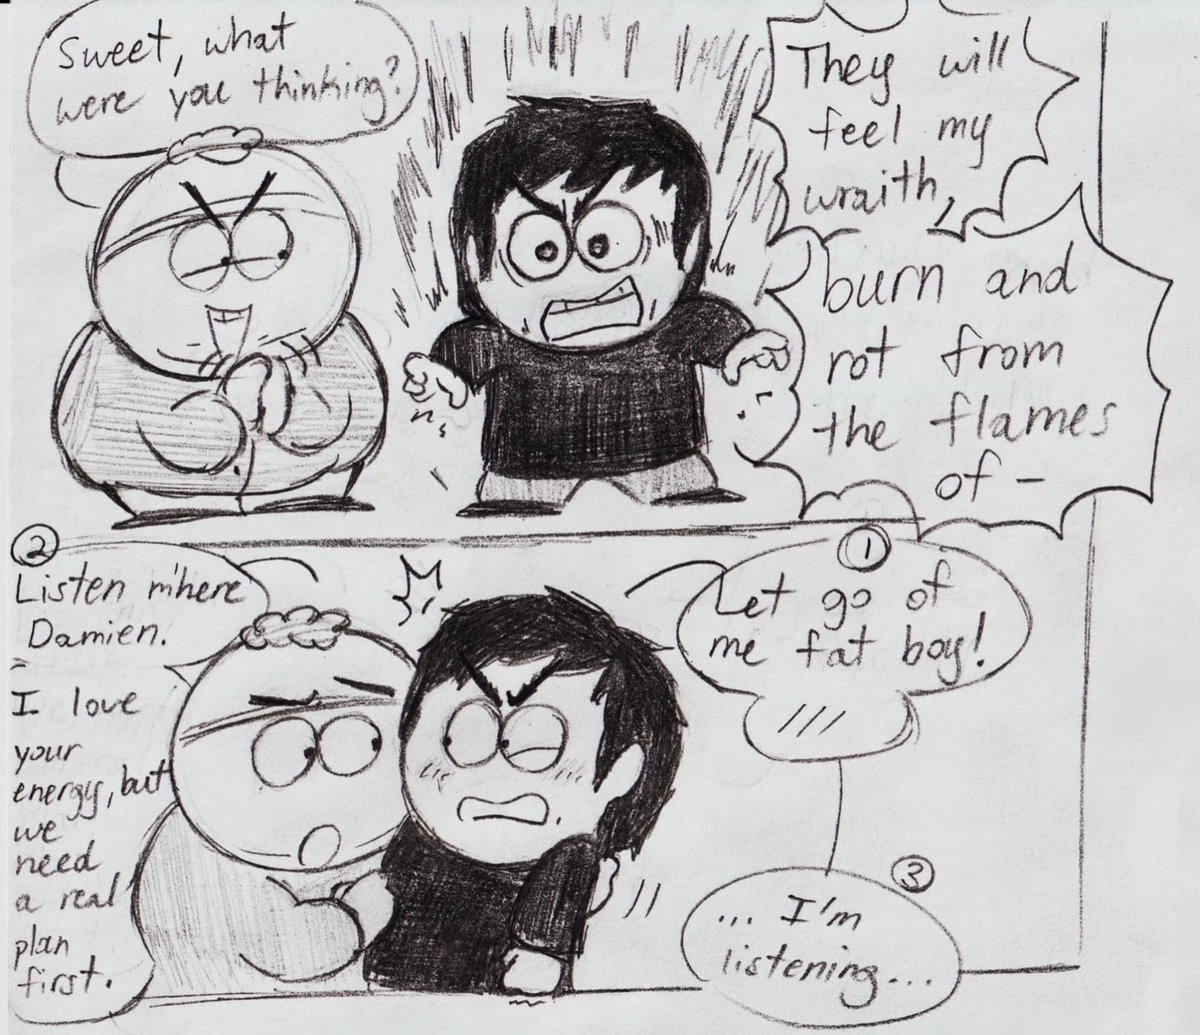 Evil bois planning revenge 😈

Request for #cartmien #spcartman #spdamien

Dialogue in alts (I misspelled wrath but I’m too lazy to fix it lol)